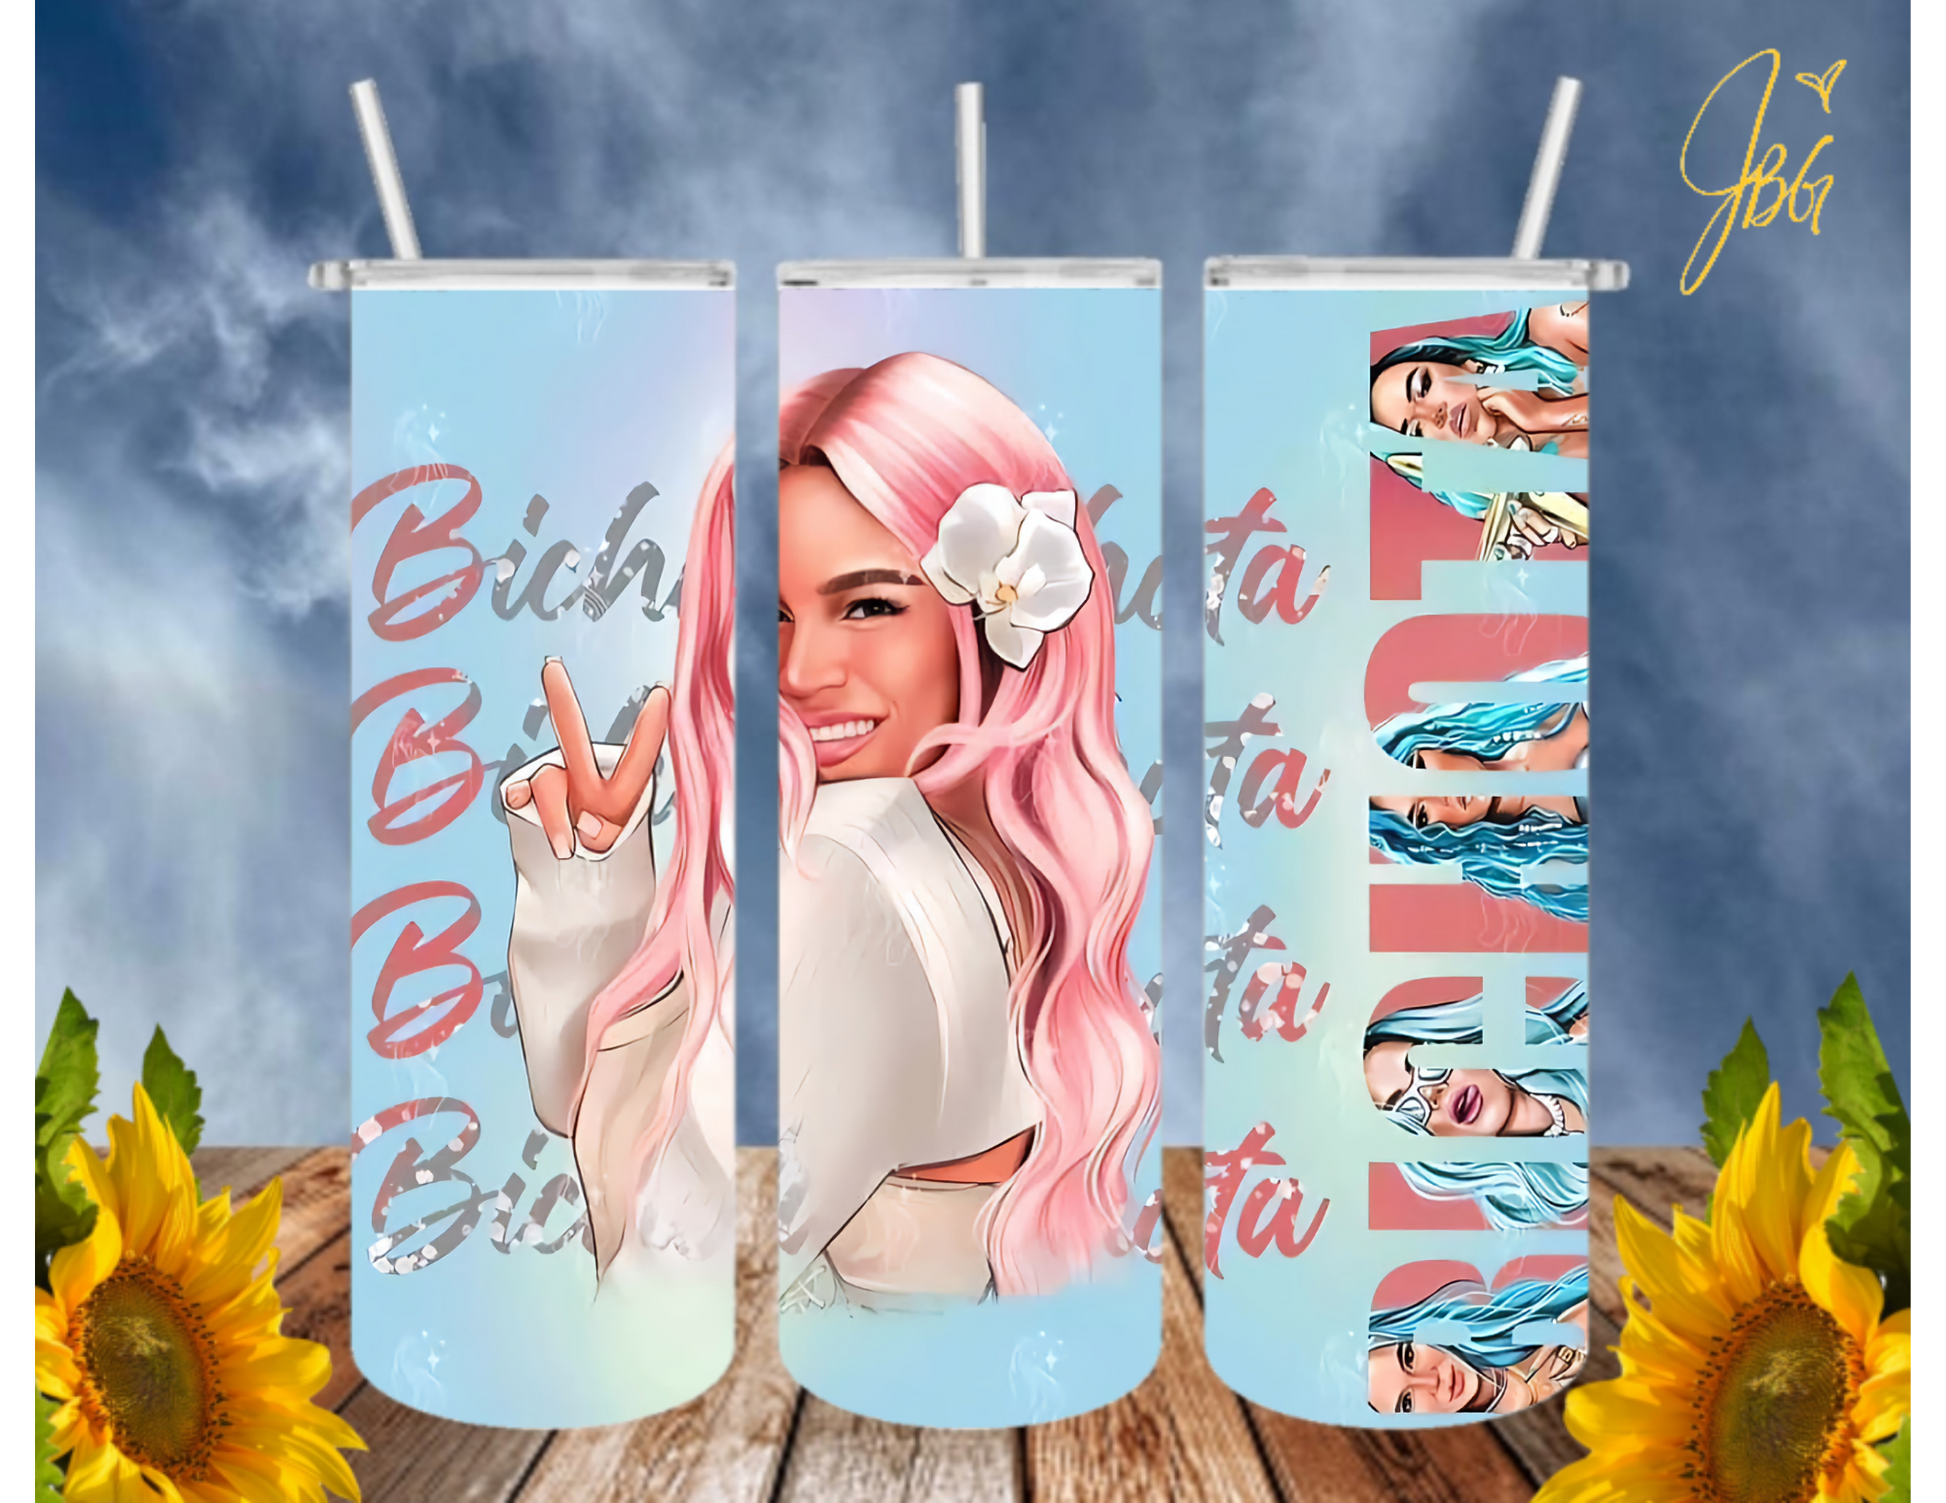 Stainless Steel sublimation 20oz tumbler with straw, American Mama Tum –  Kori Beth Crafts